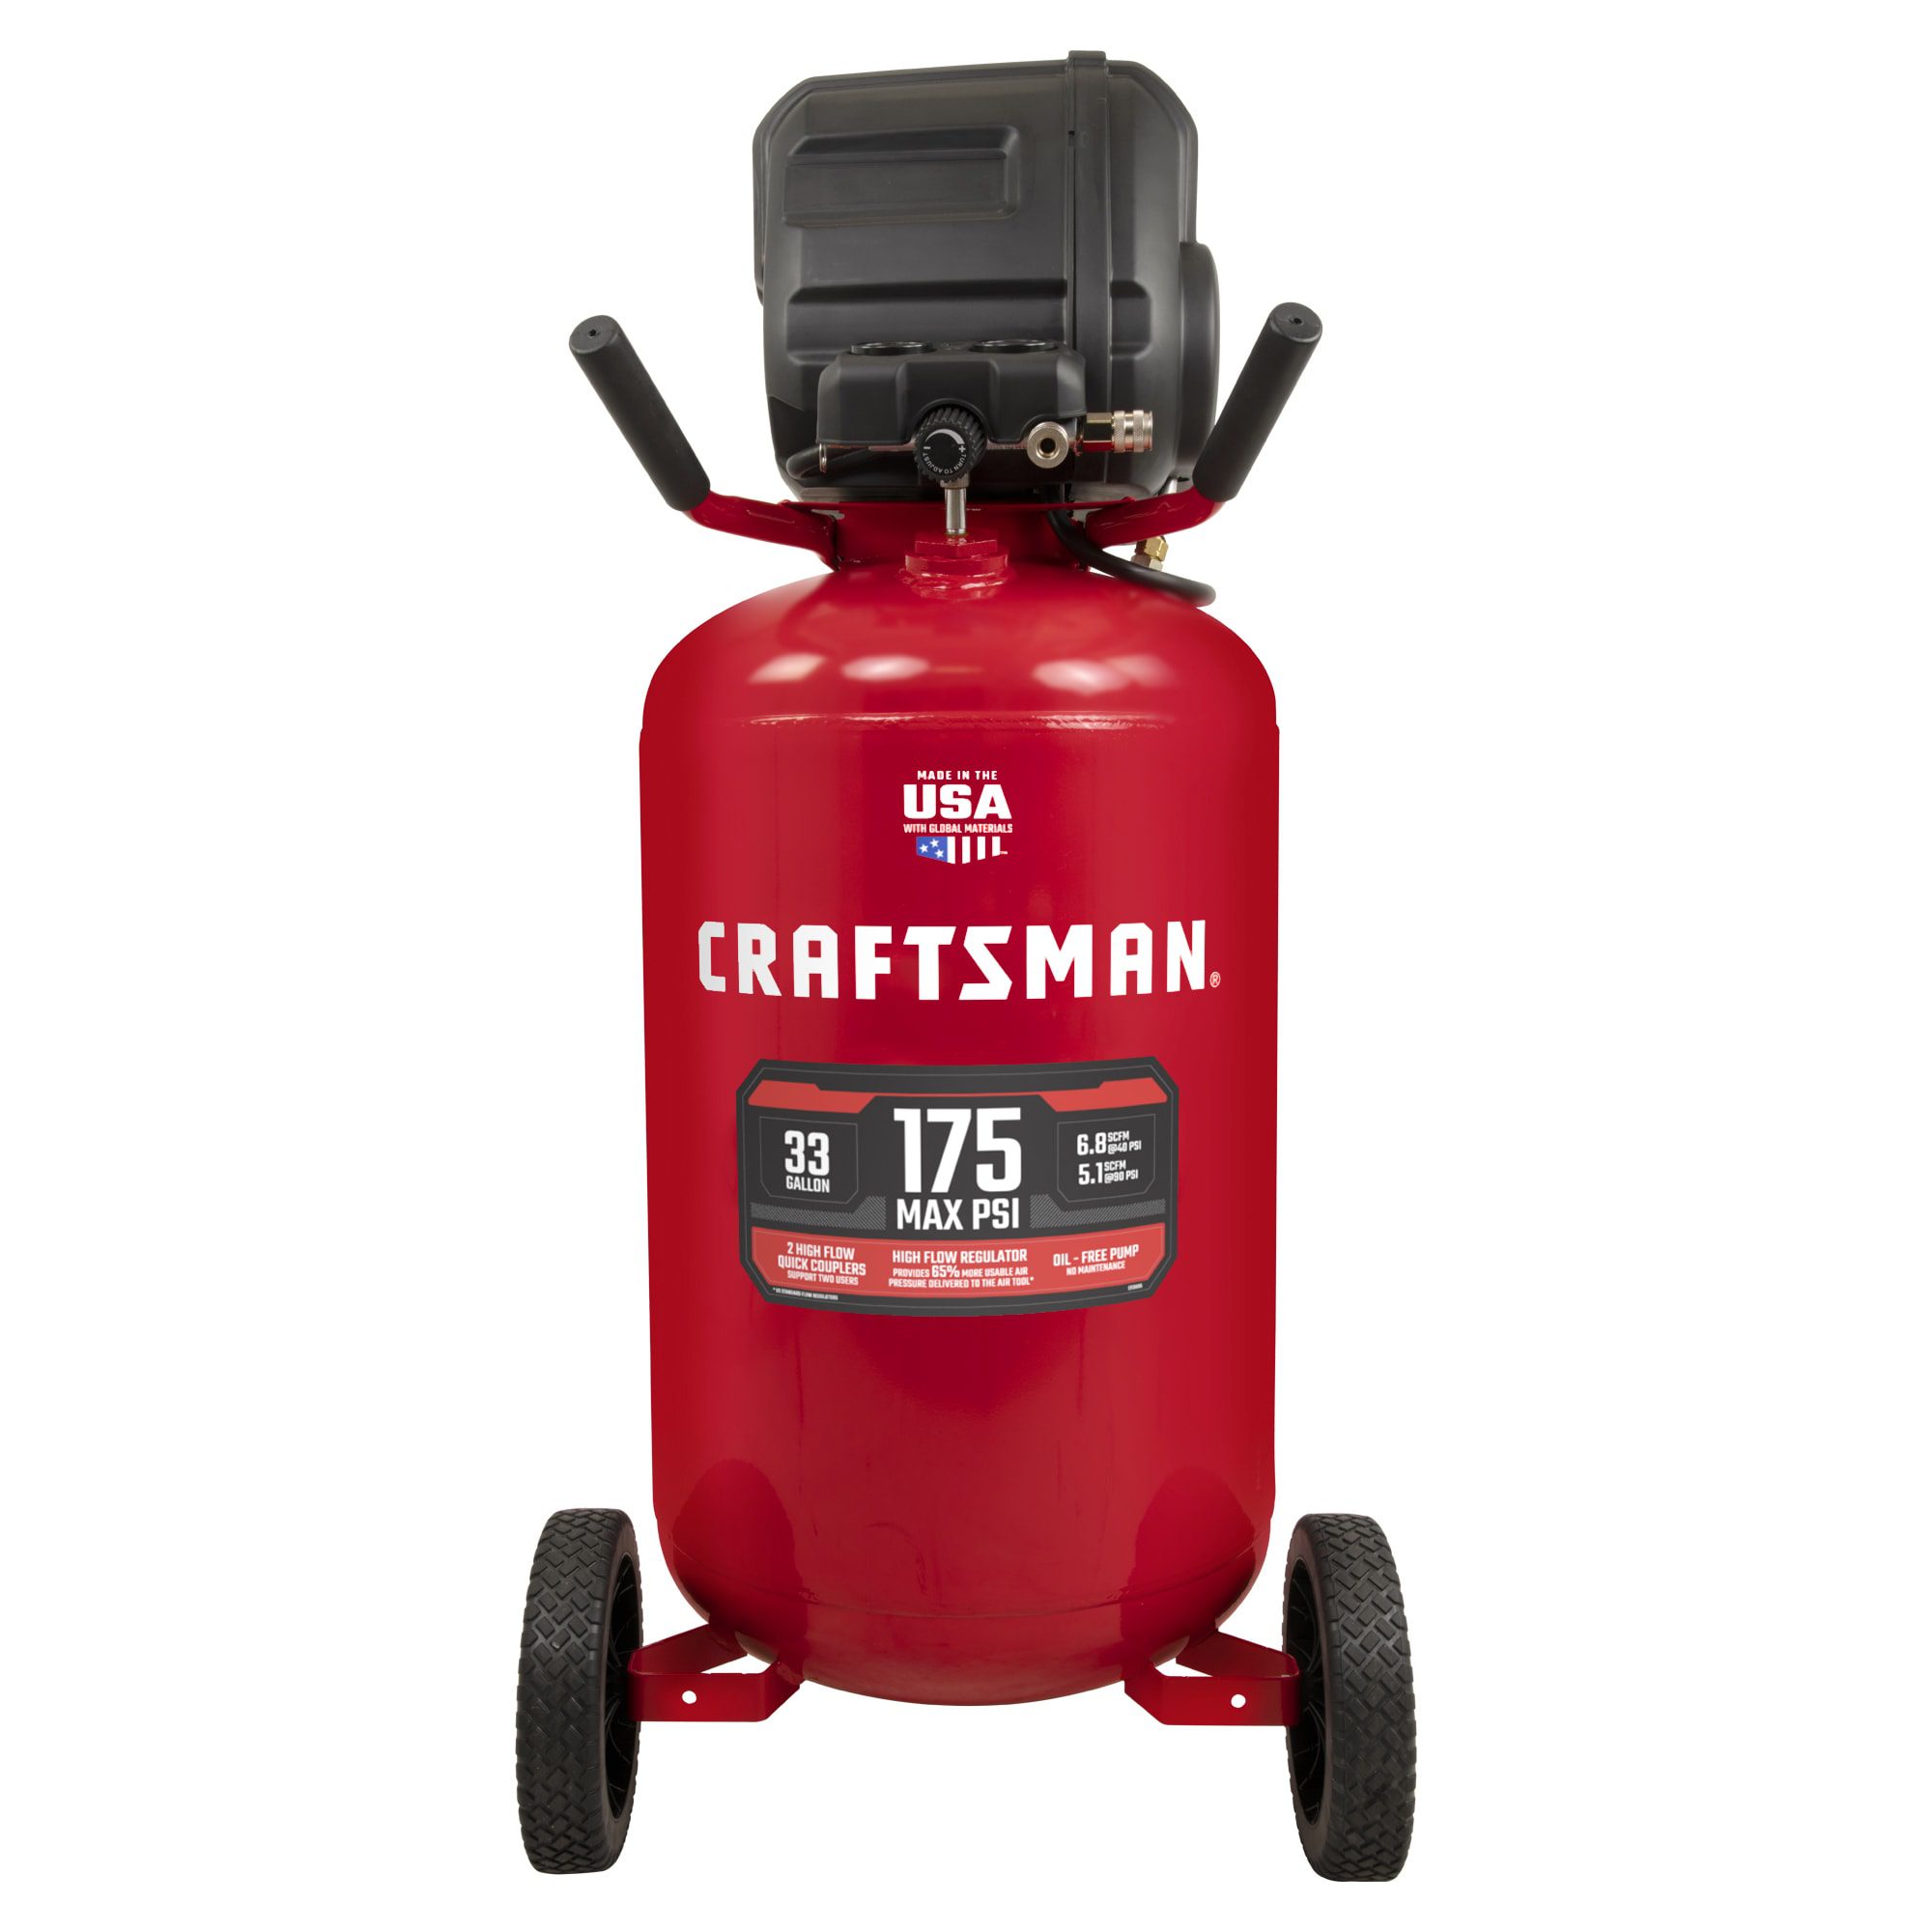 Who Makes Craftsman Air Compressors